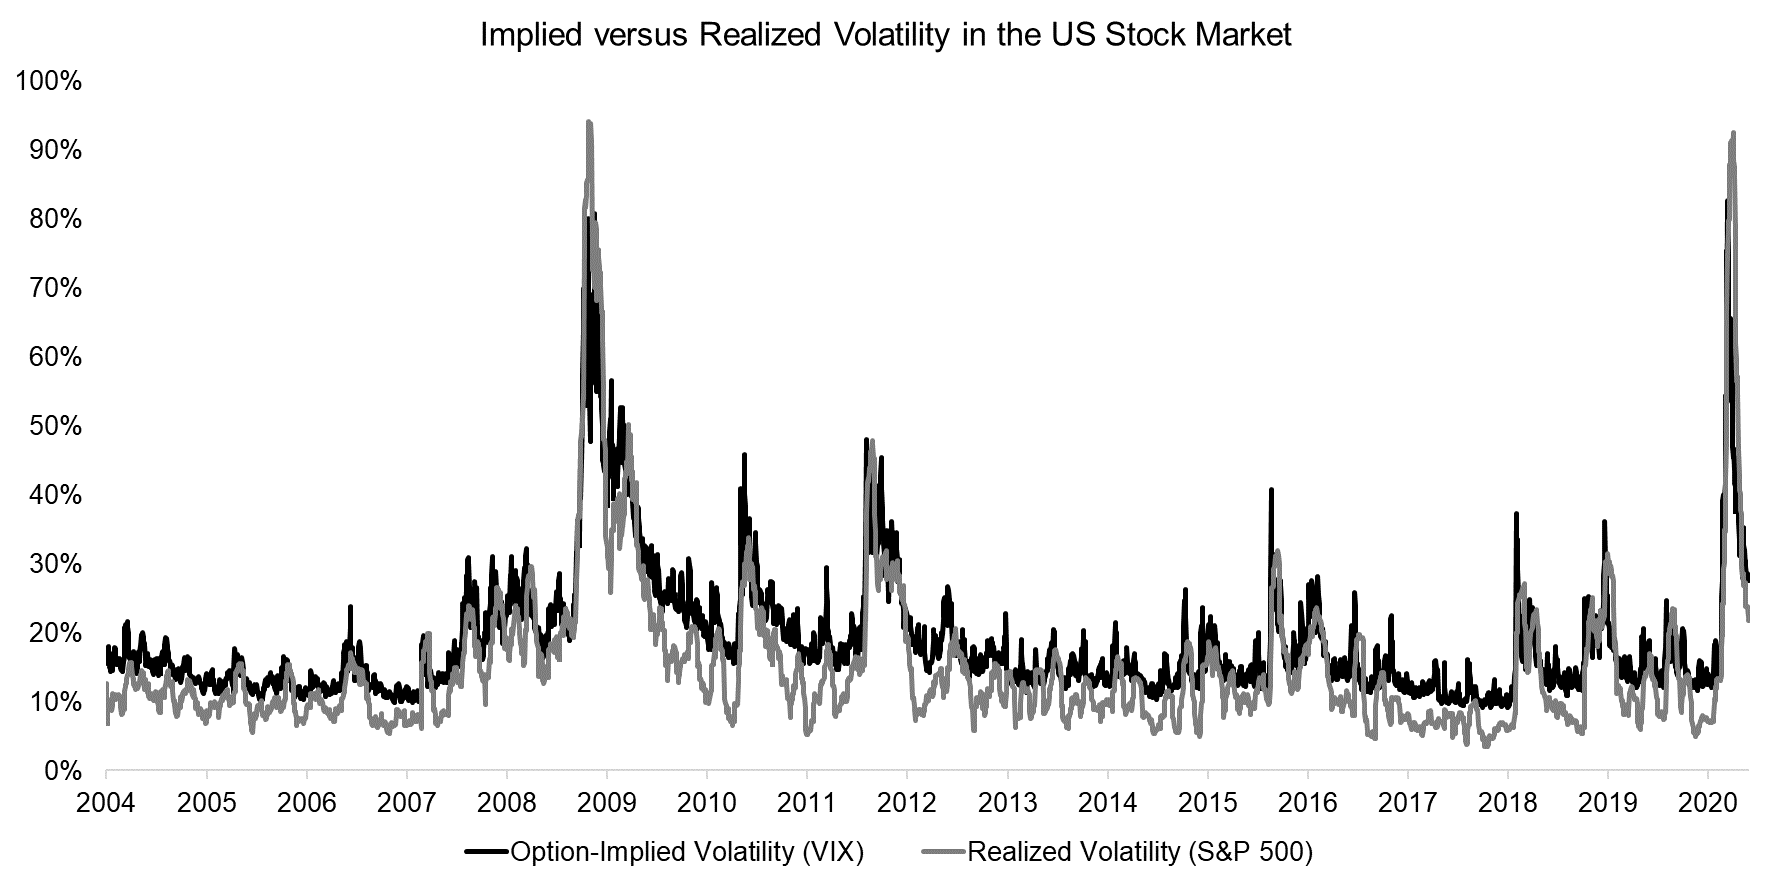 Implied versus Realized Volatility in the US Stock Market